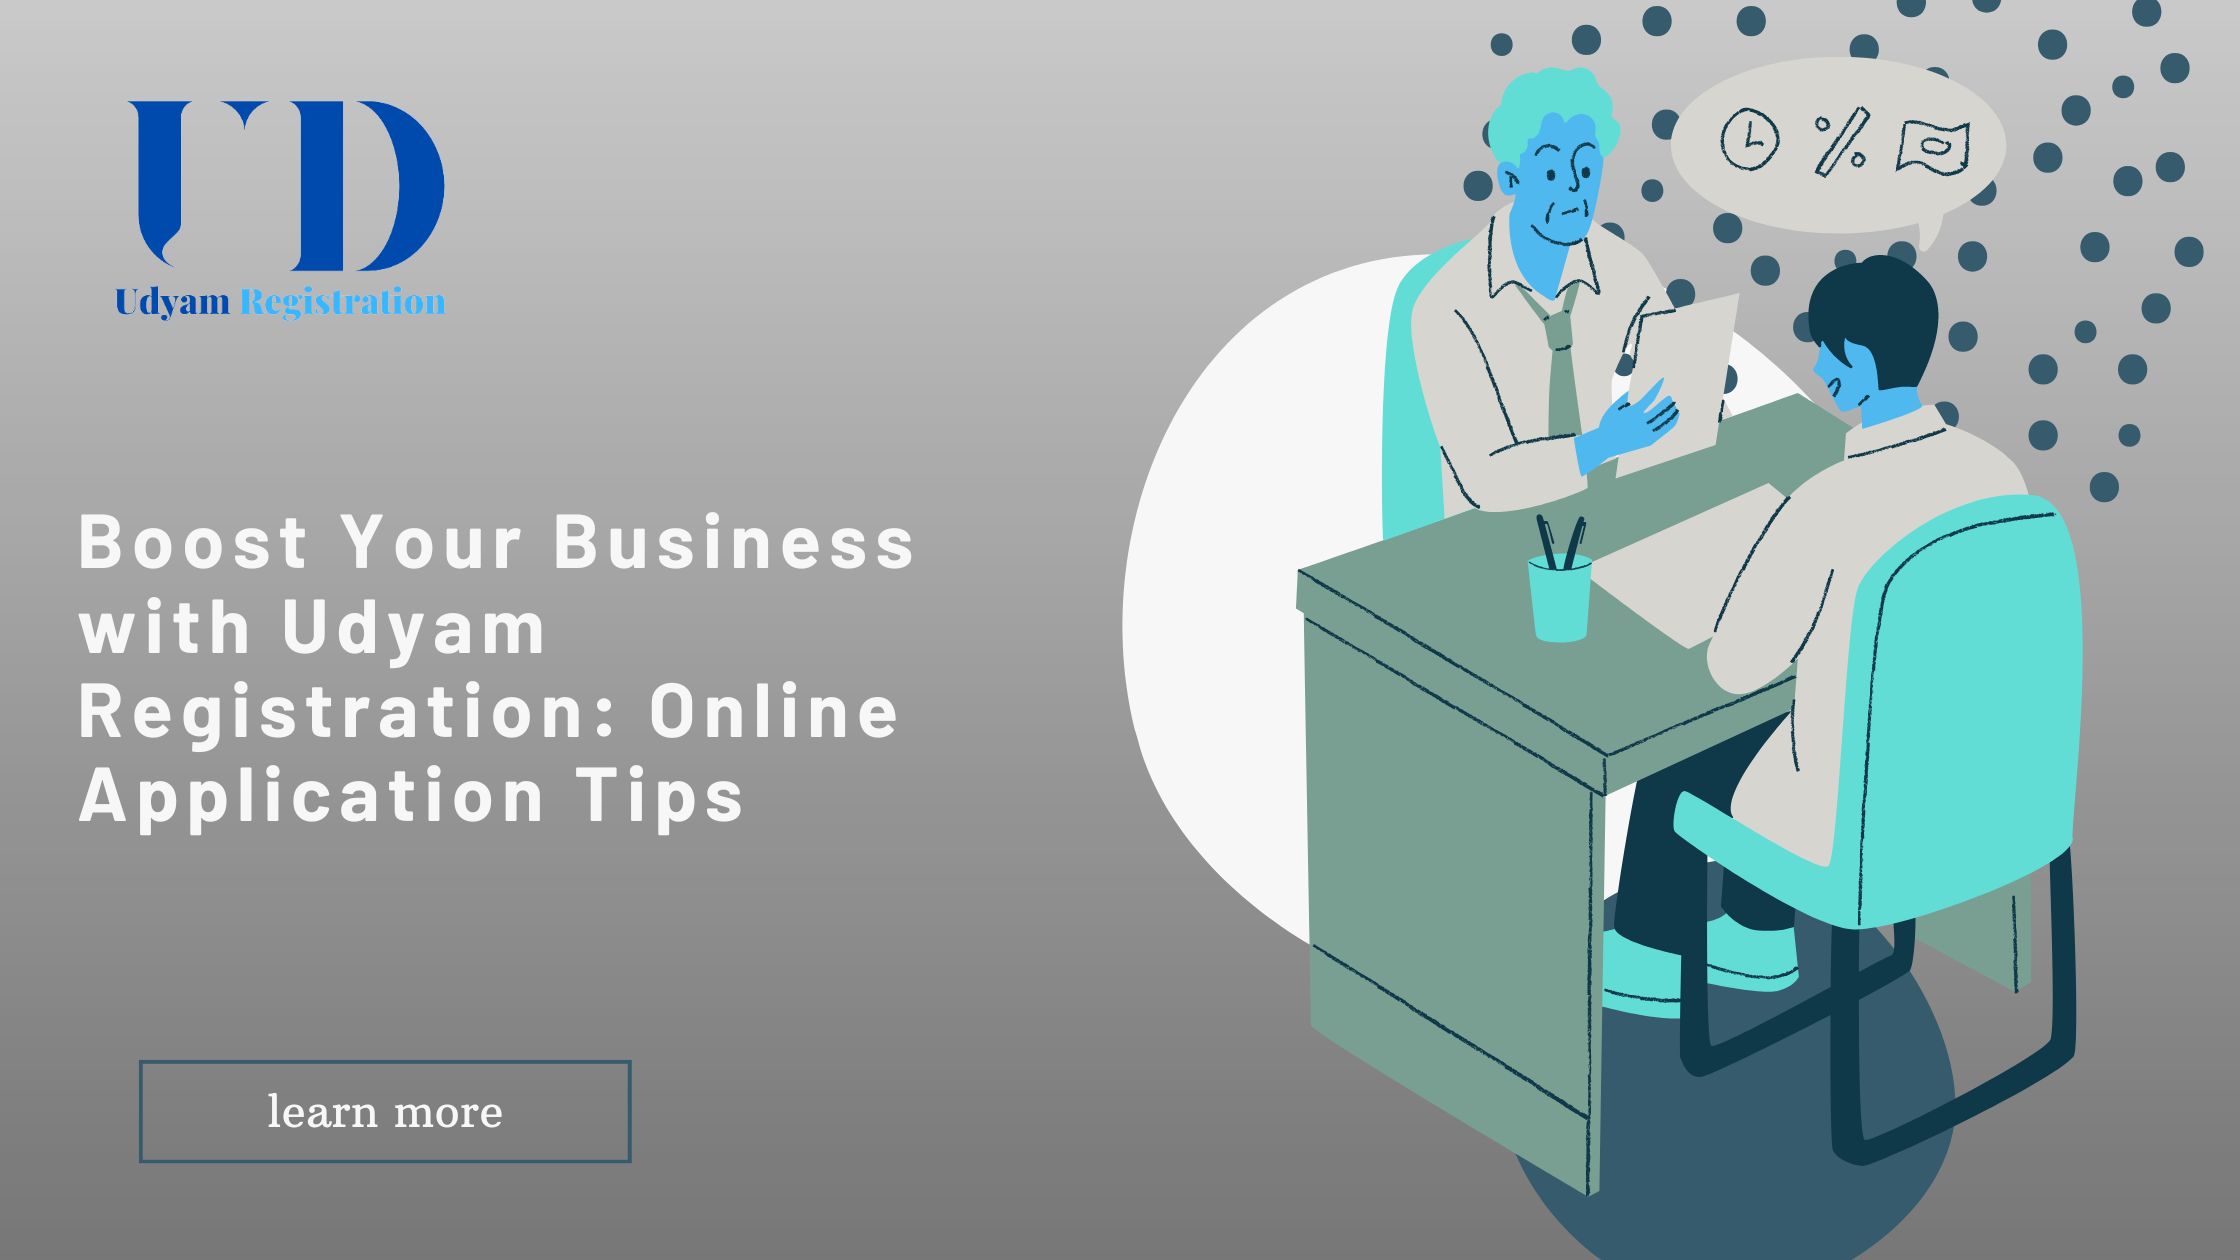 Boost Your Business with Udyam Registration: Online Application Tips